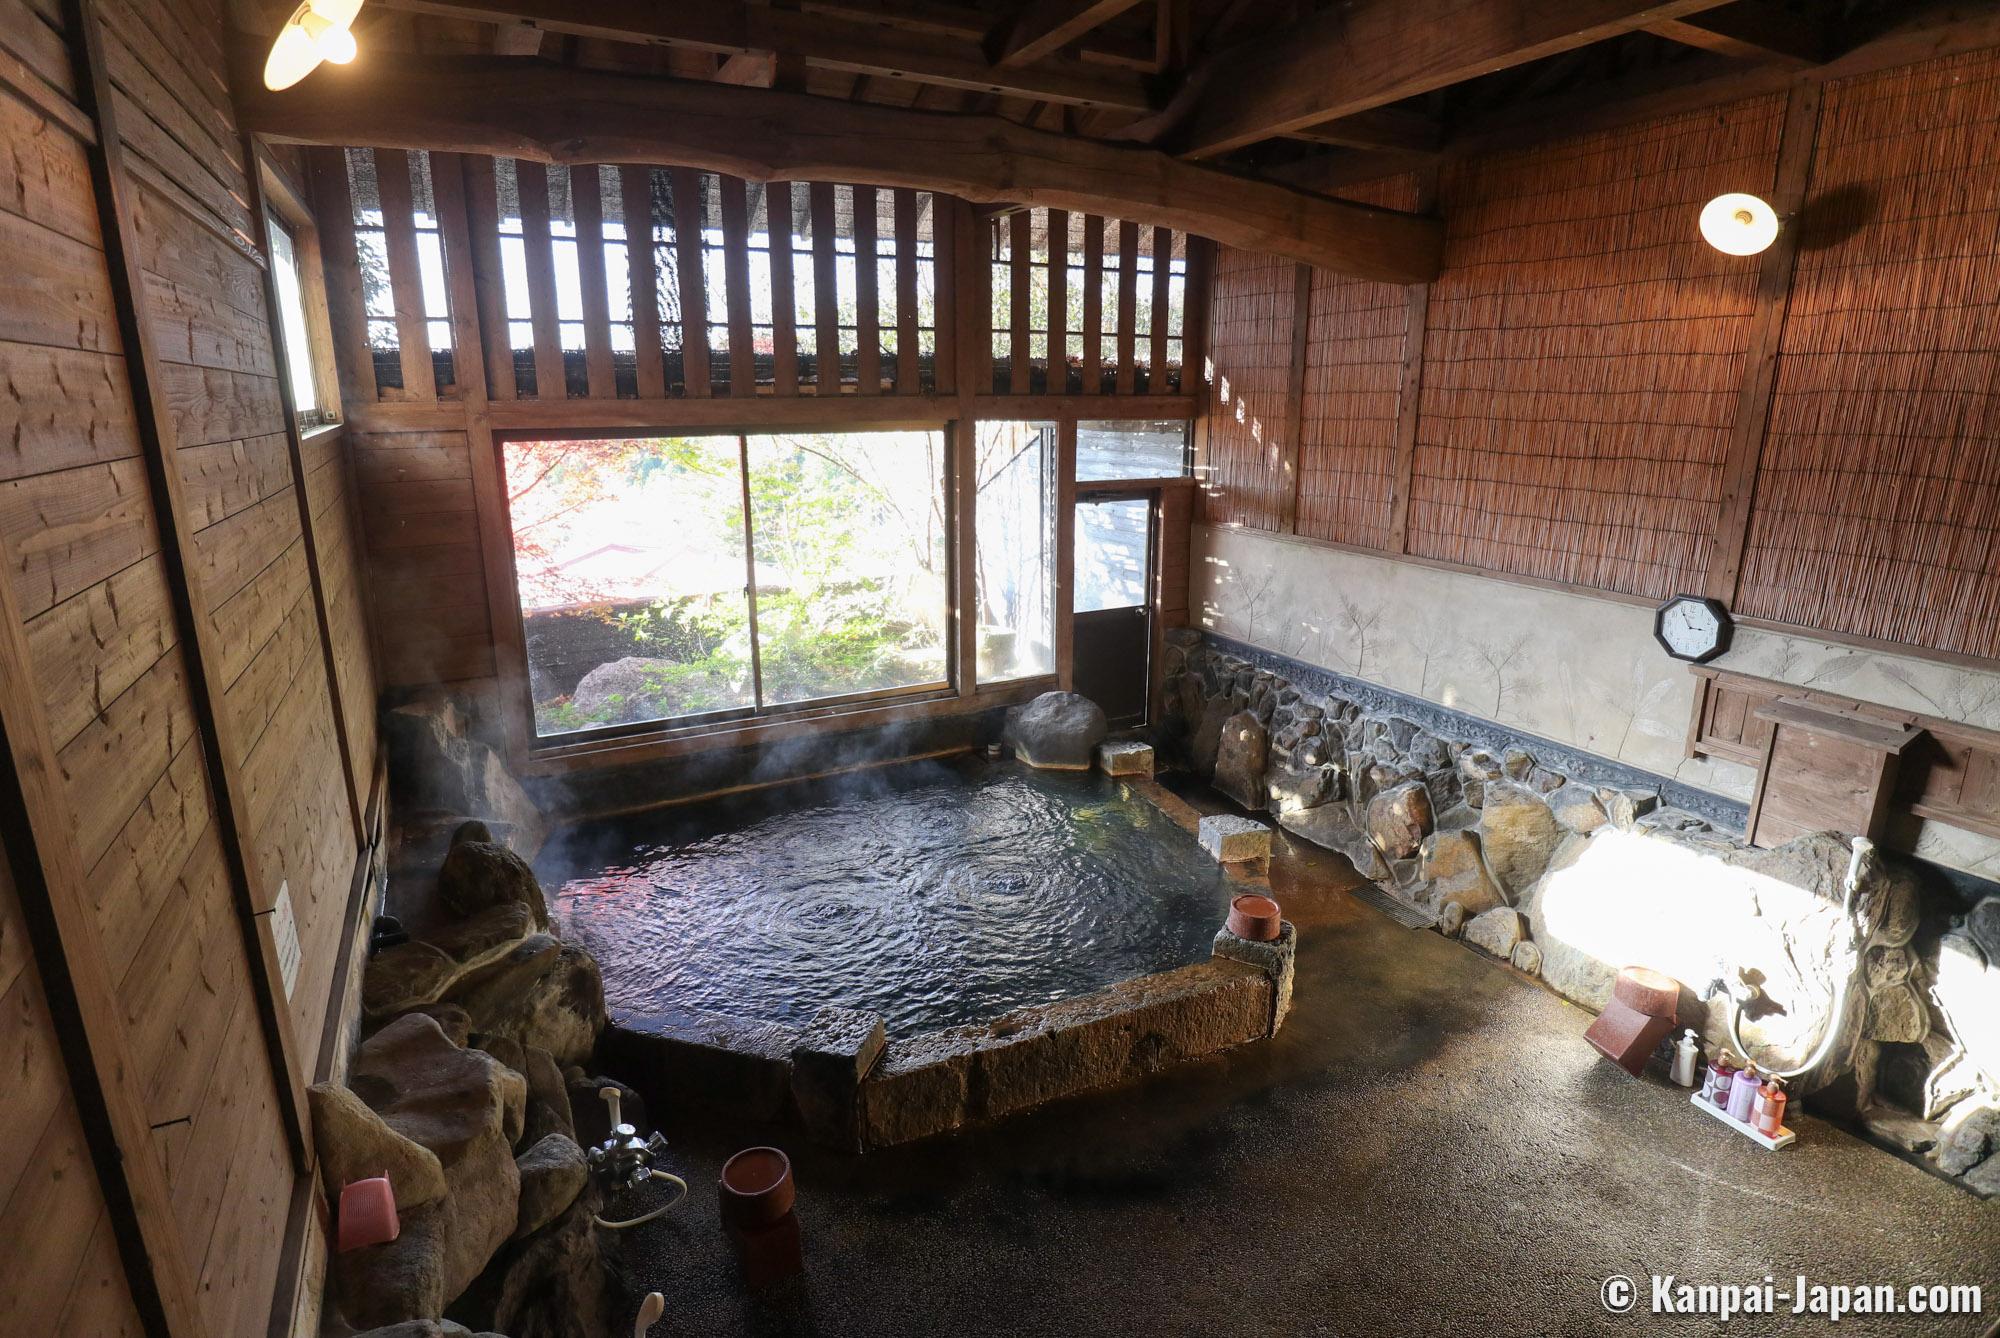 Onsen Culture in Japan